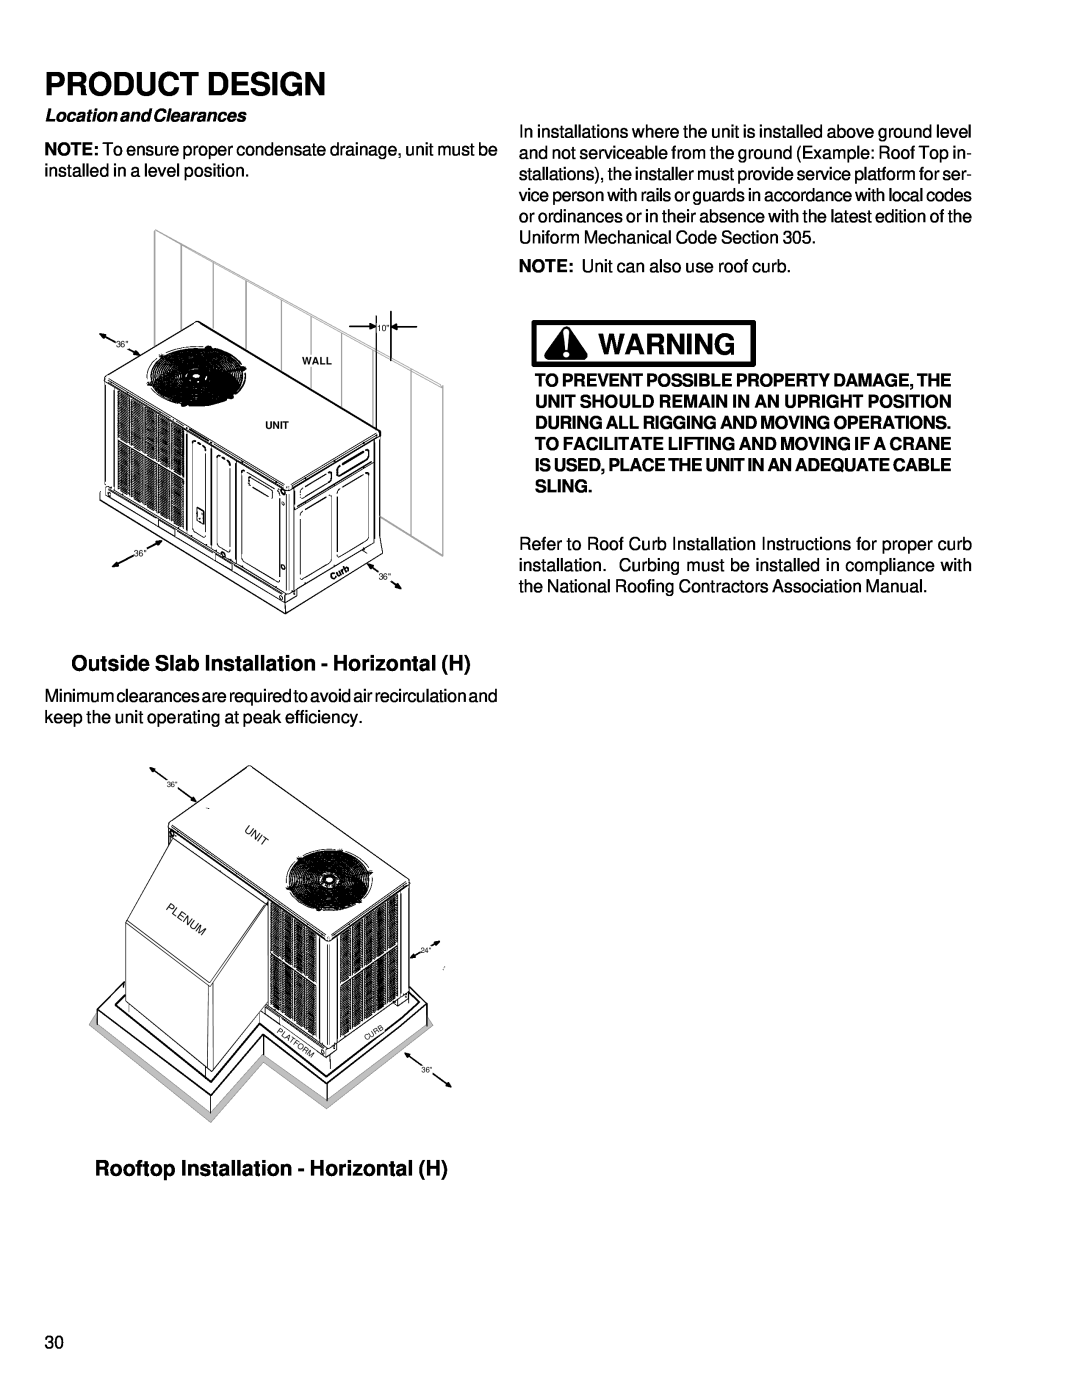 Goodmans GPC 13 SEER R-410A Product Design, Outside Slab Installation - Horizontal H, Rooftop Installation - Horizontal H 